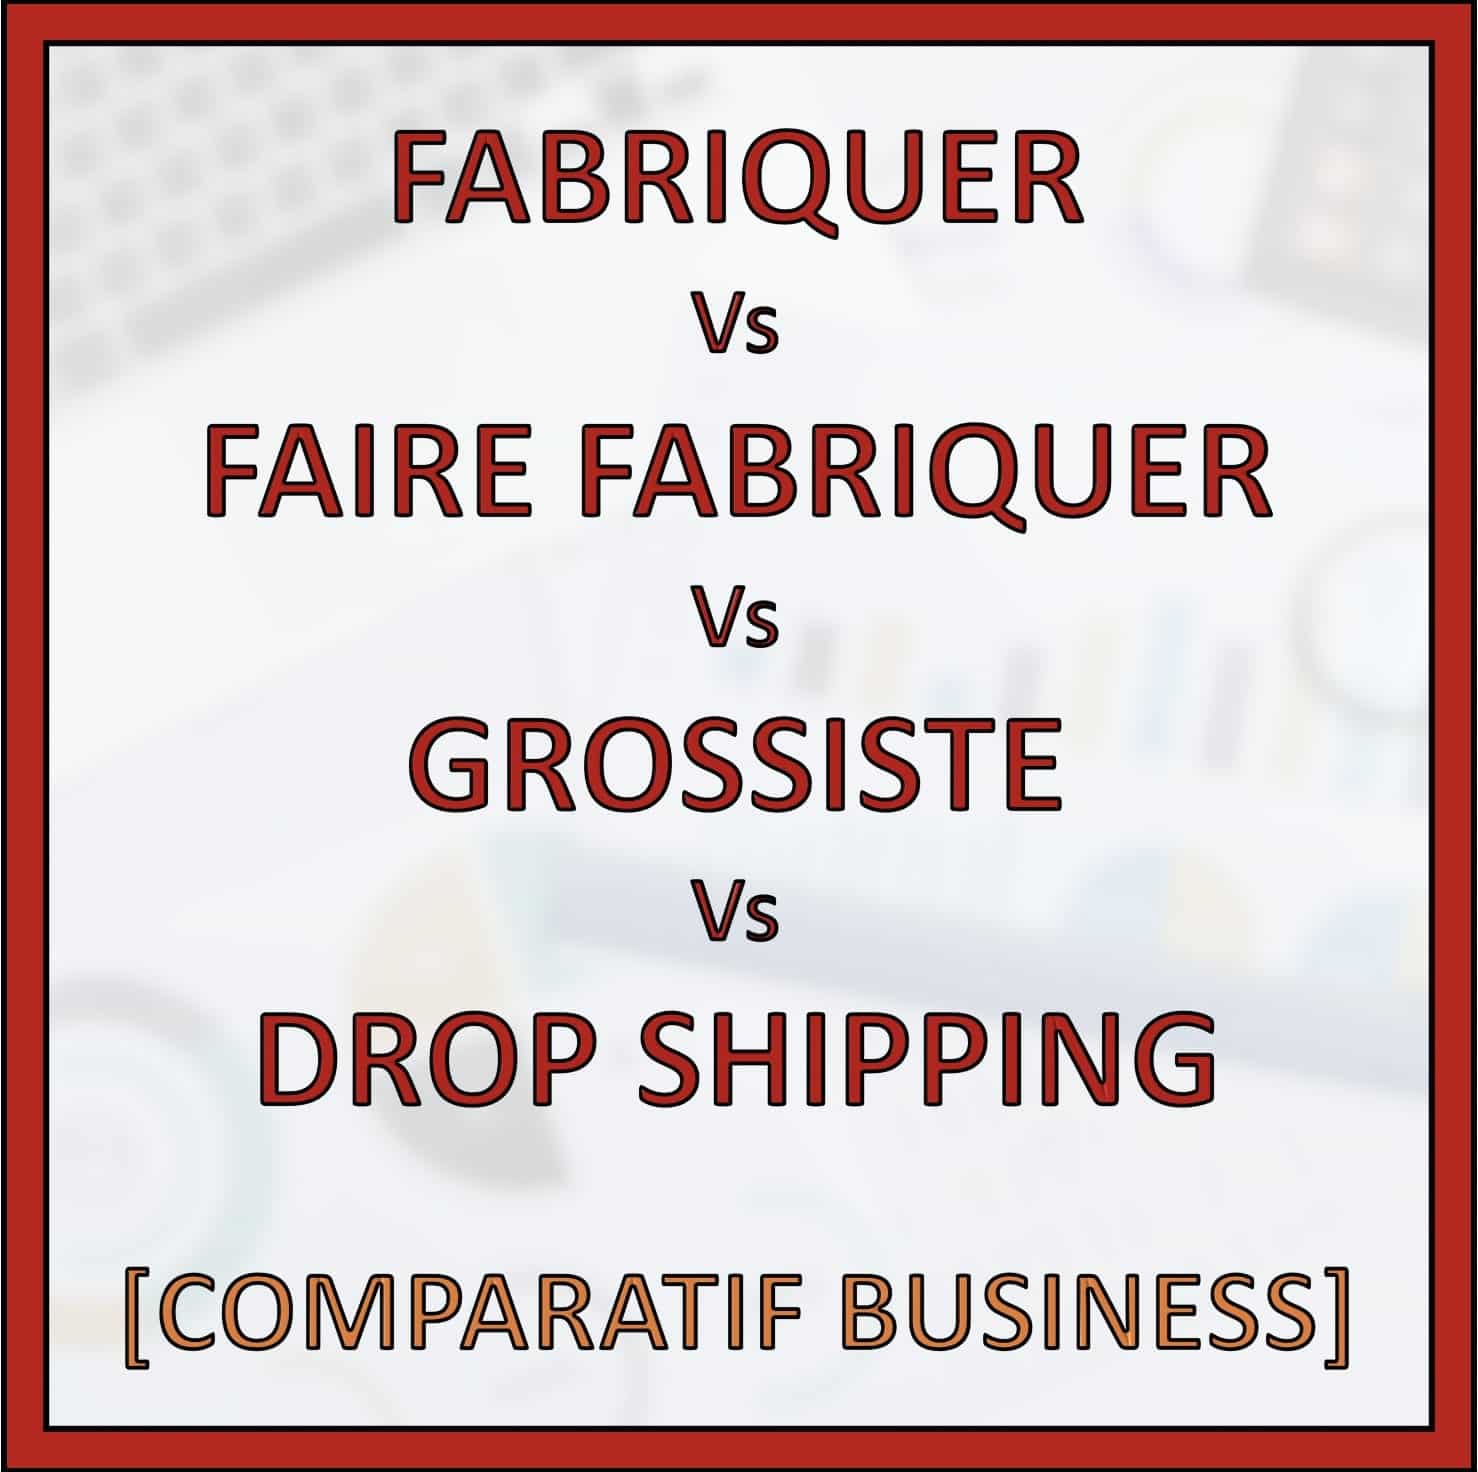 comparatif business fabriquer grossiste dropshipping